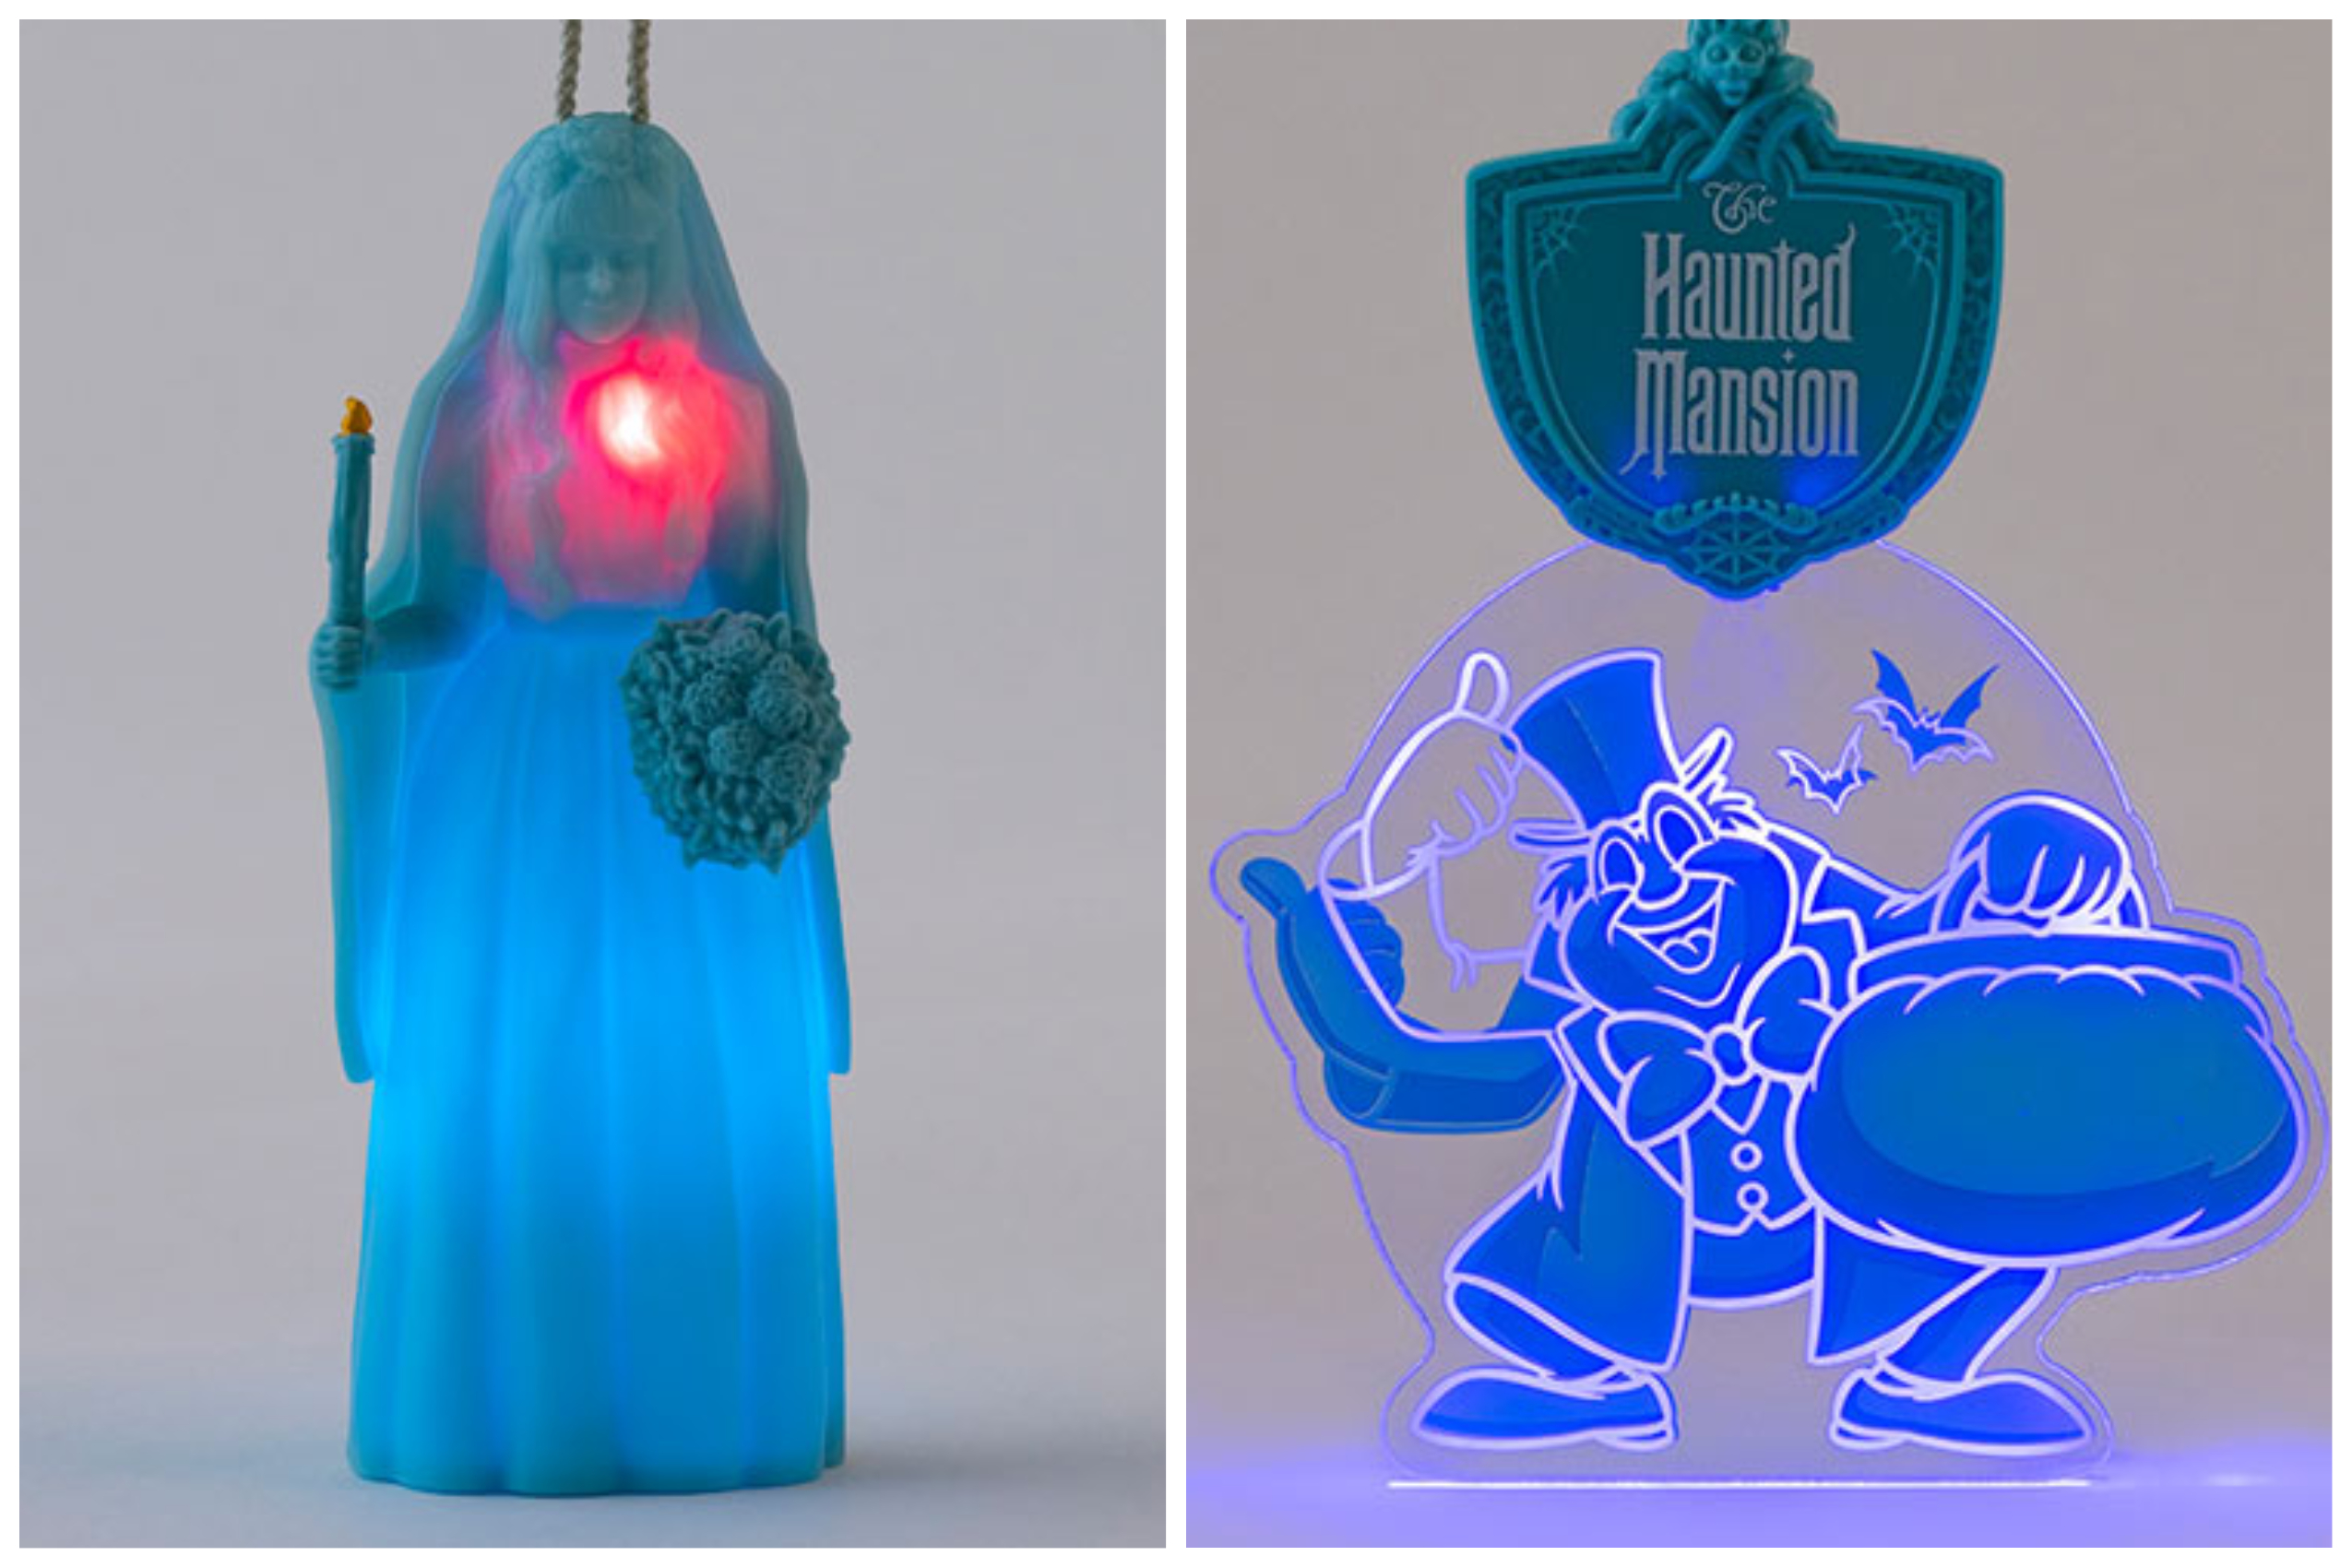 PHOTOS: Haunted Mansion Light-Up Pendants Coming September 29 